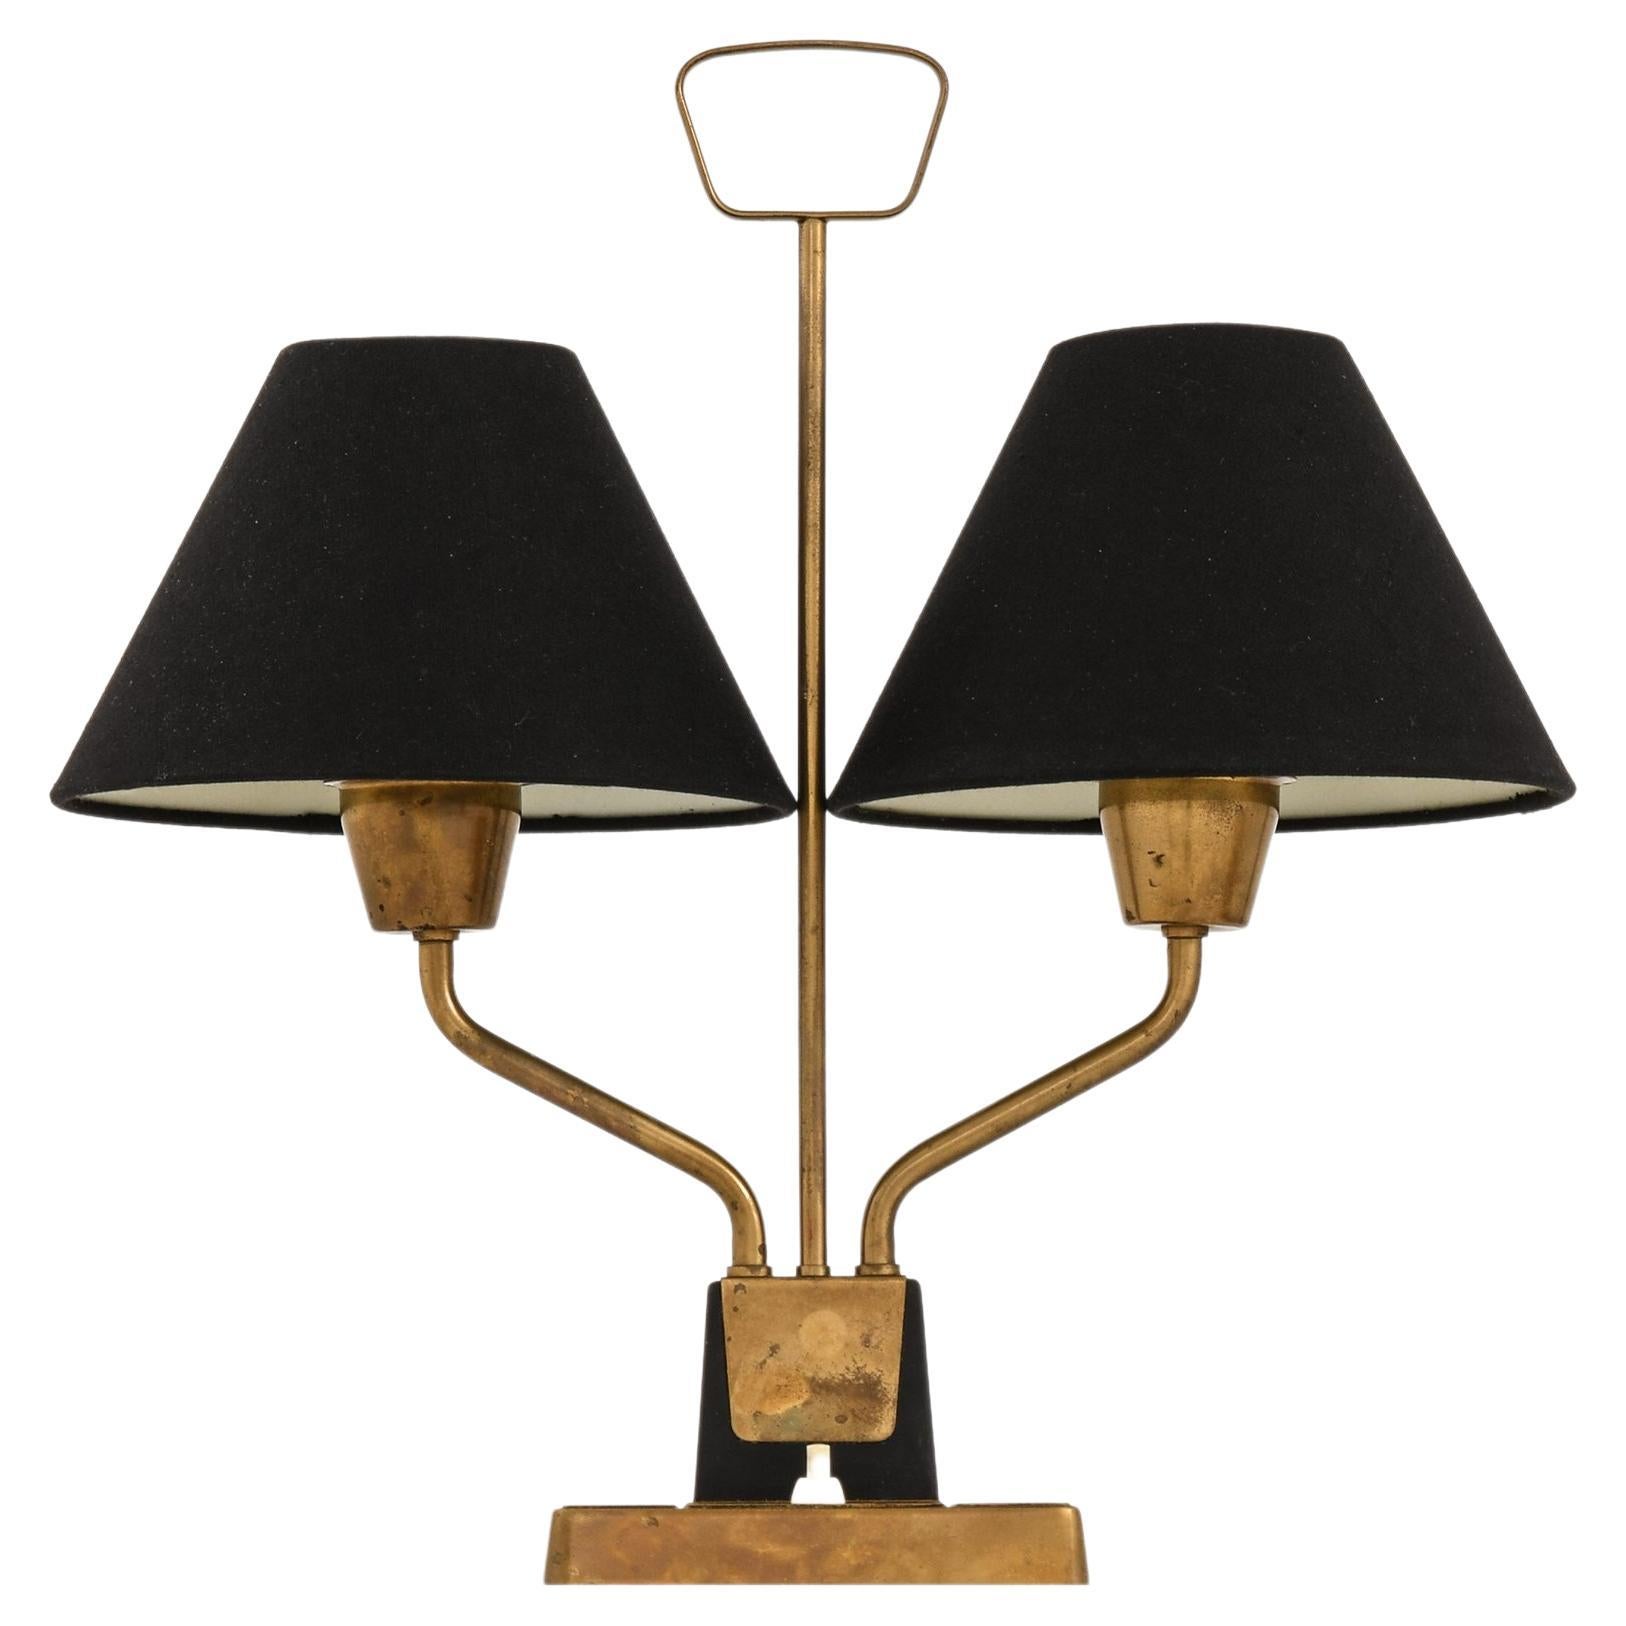 Table Lamp in Brass and Black Fabric Lamp Shades by Sonja Katzin, 1950's ASEA For Sale